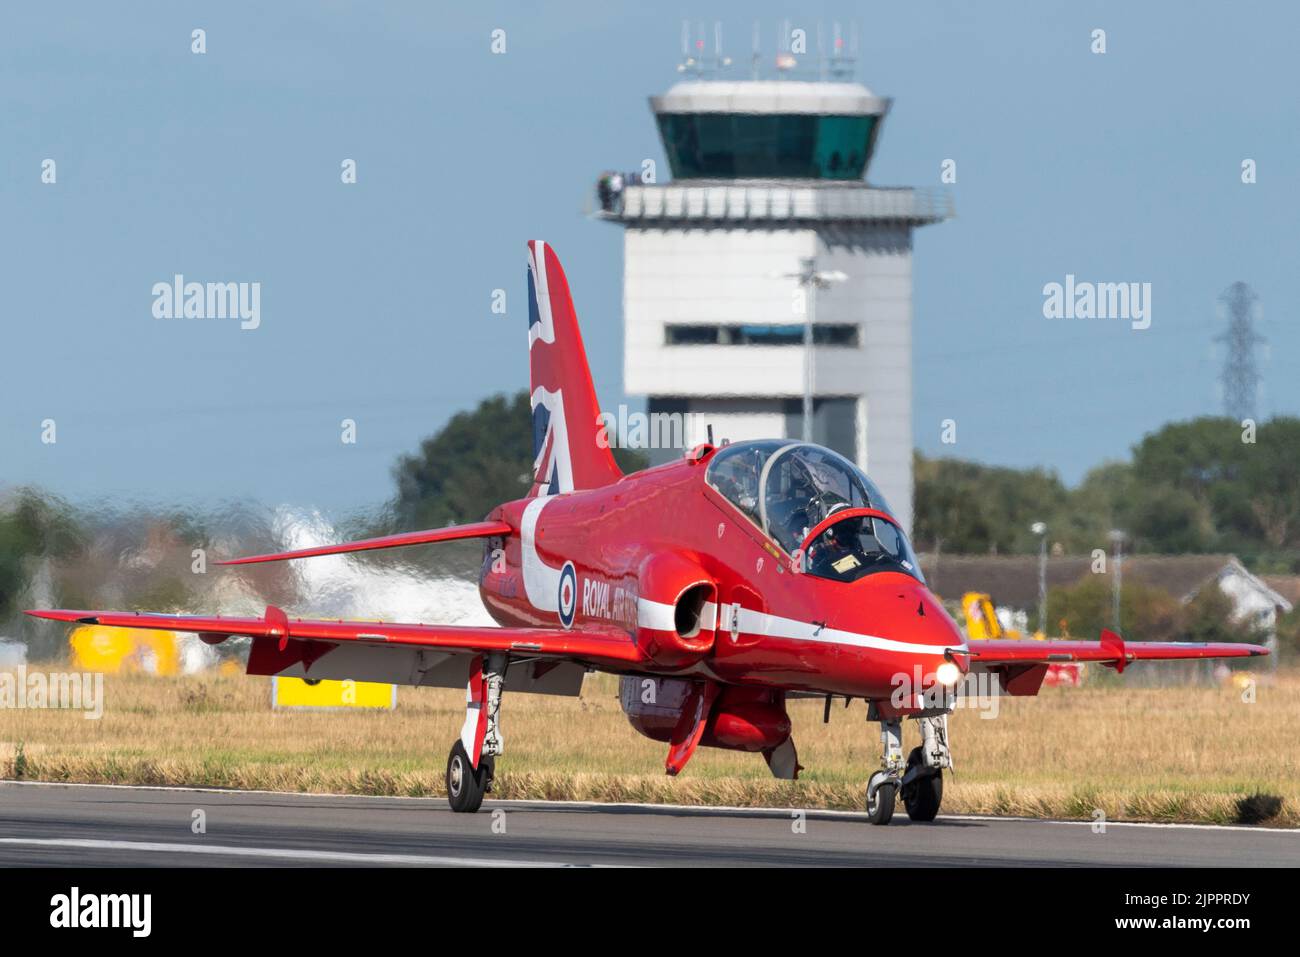 Royal Air Force Red Arrows display team BAe Hawk T.1 jet plane after landing at London Southend Airport for weekend of airshows. Air Traffic tower Stock Photo